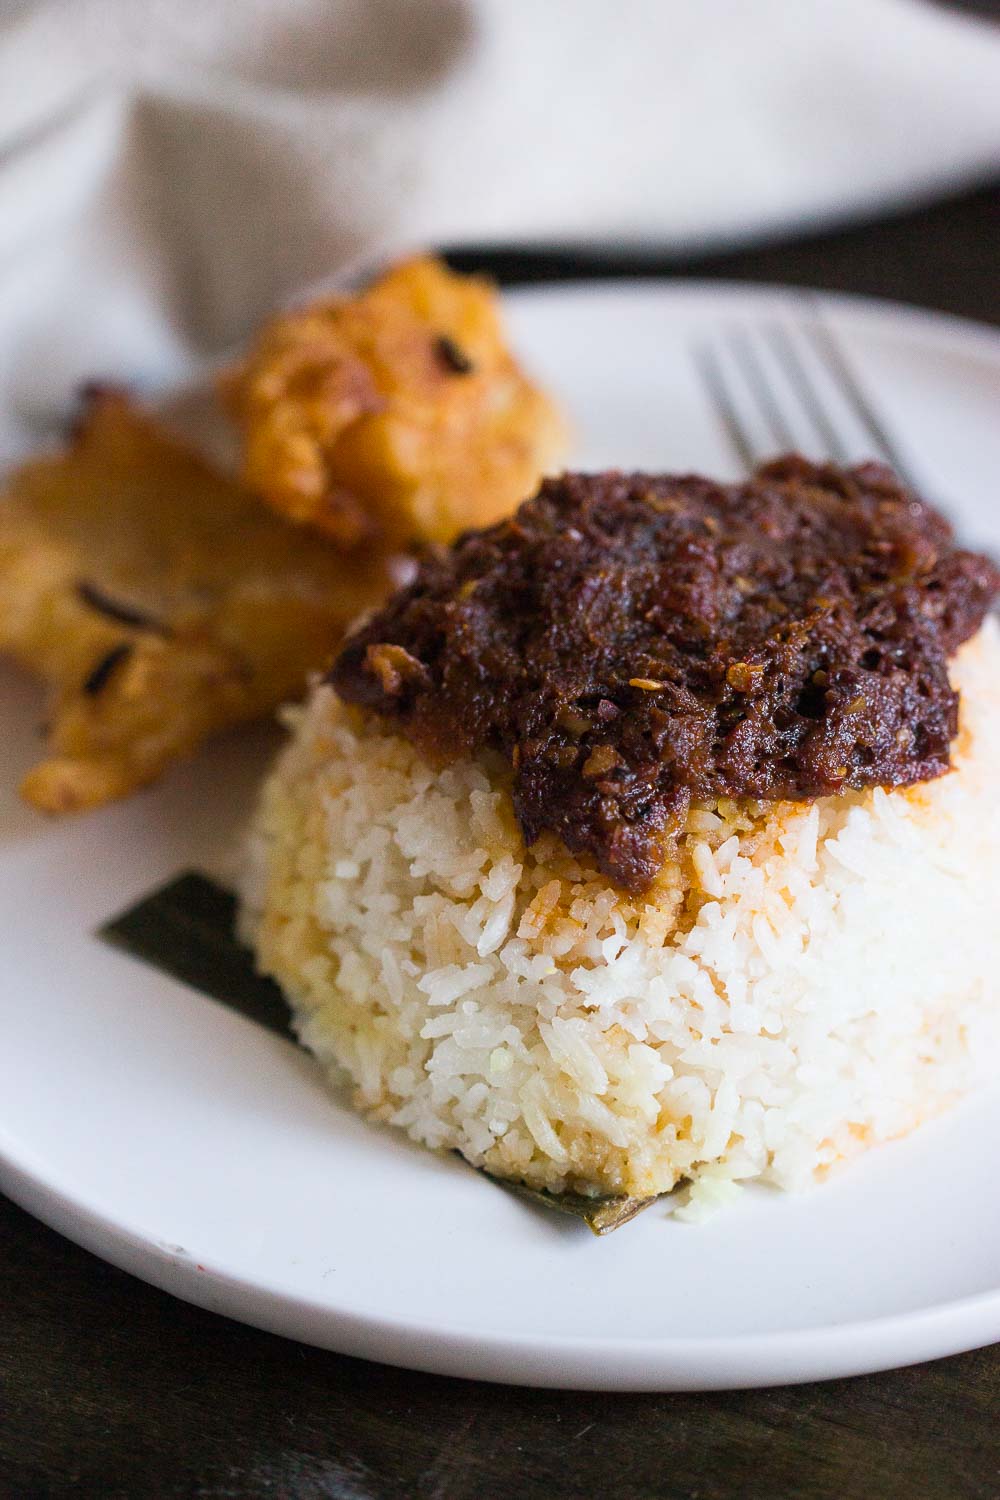 Fragrant nasi lemak or coconut rice makes a favorite dish for breakfast or any time of the day. Serve this with Javanese fried chicken, fried egg, and chili sauce for a delicious flavor of Indonesia. 